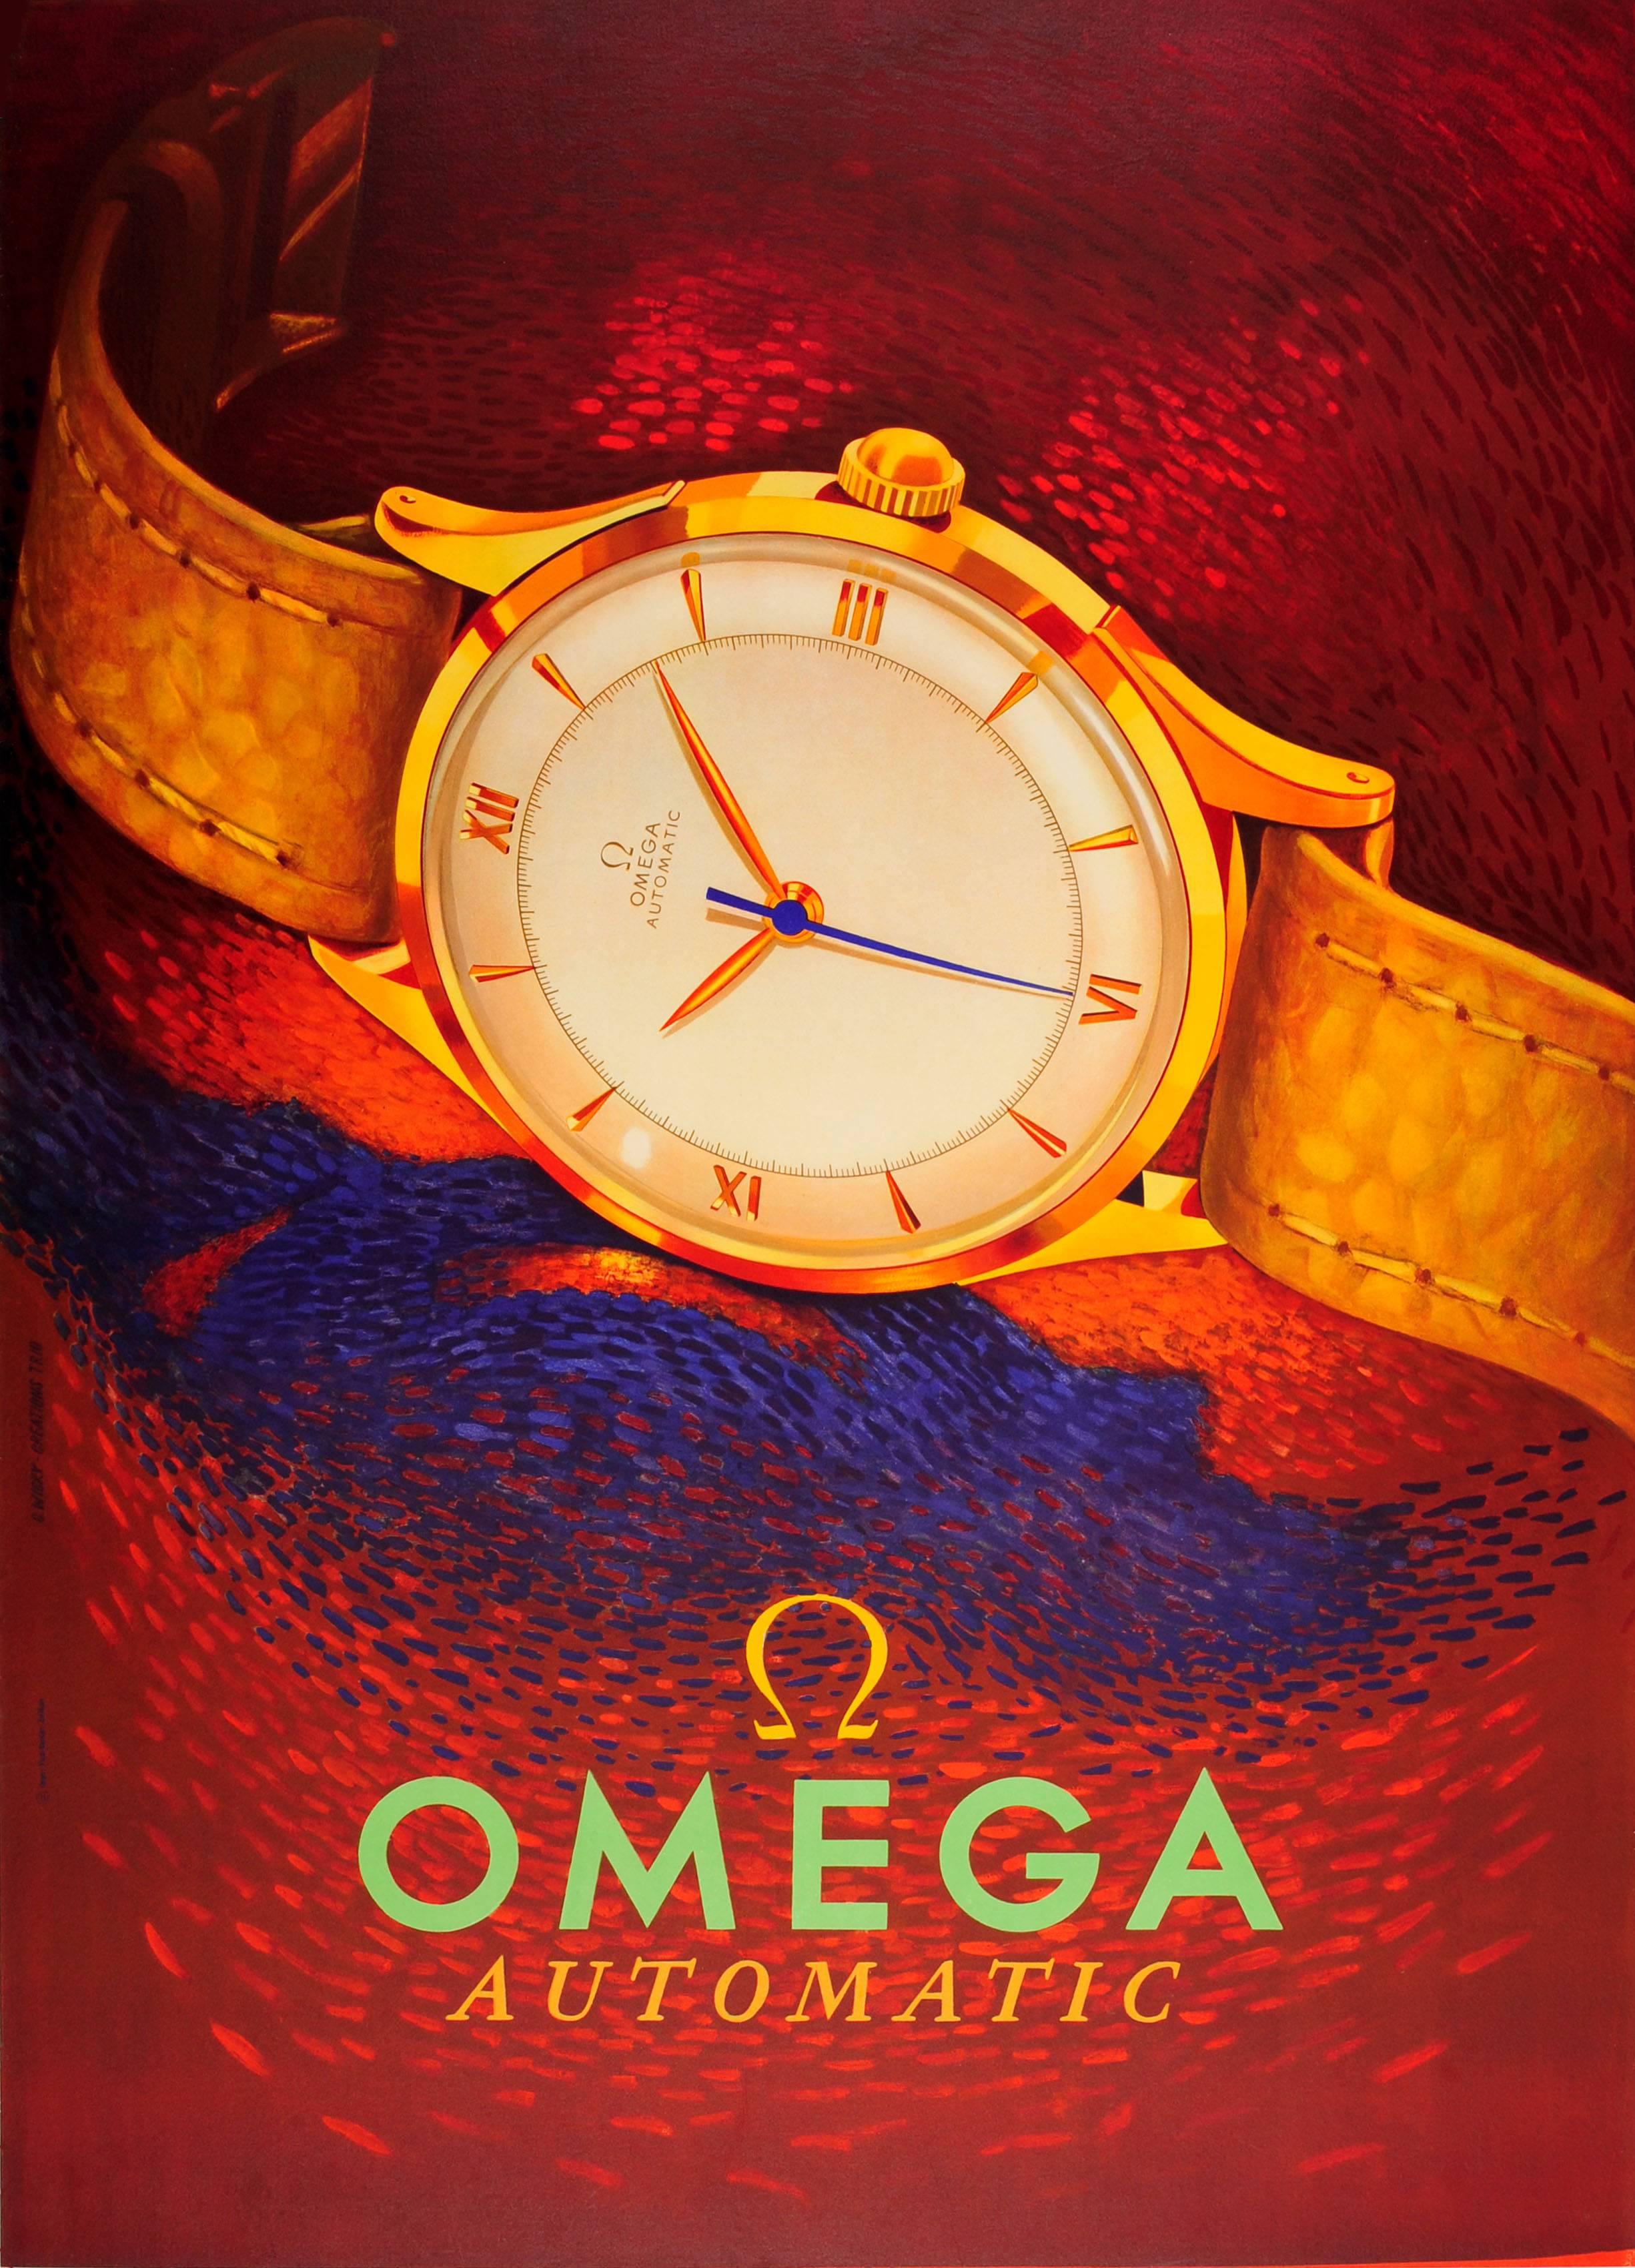 Georges Wicky Print - Original Vintage Swiss Watch Advertising Poster For Omega Automatic Watches